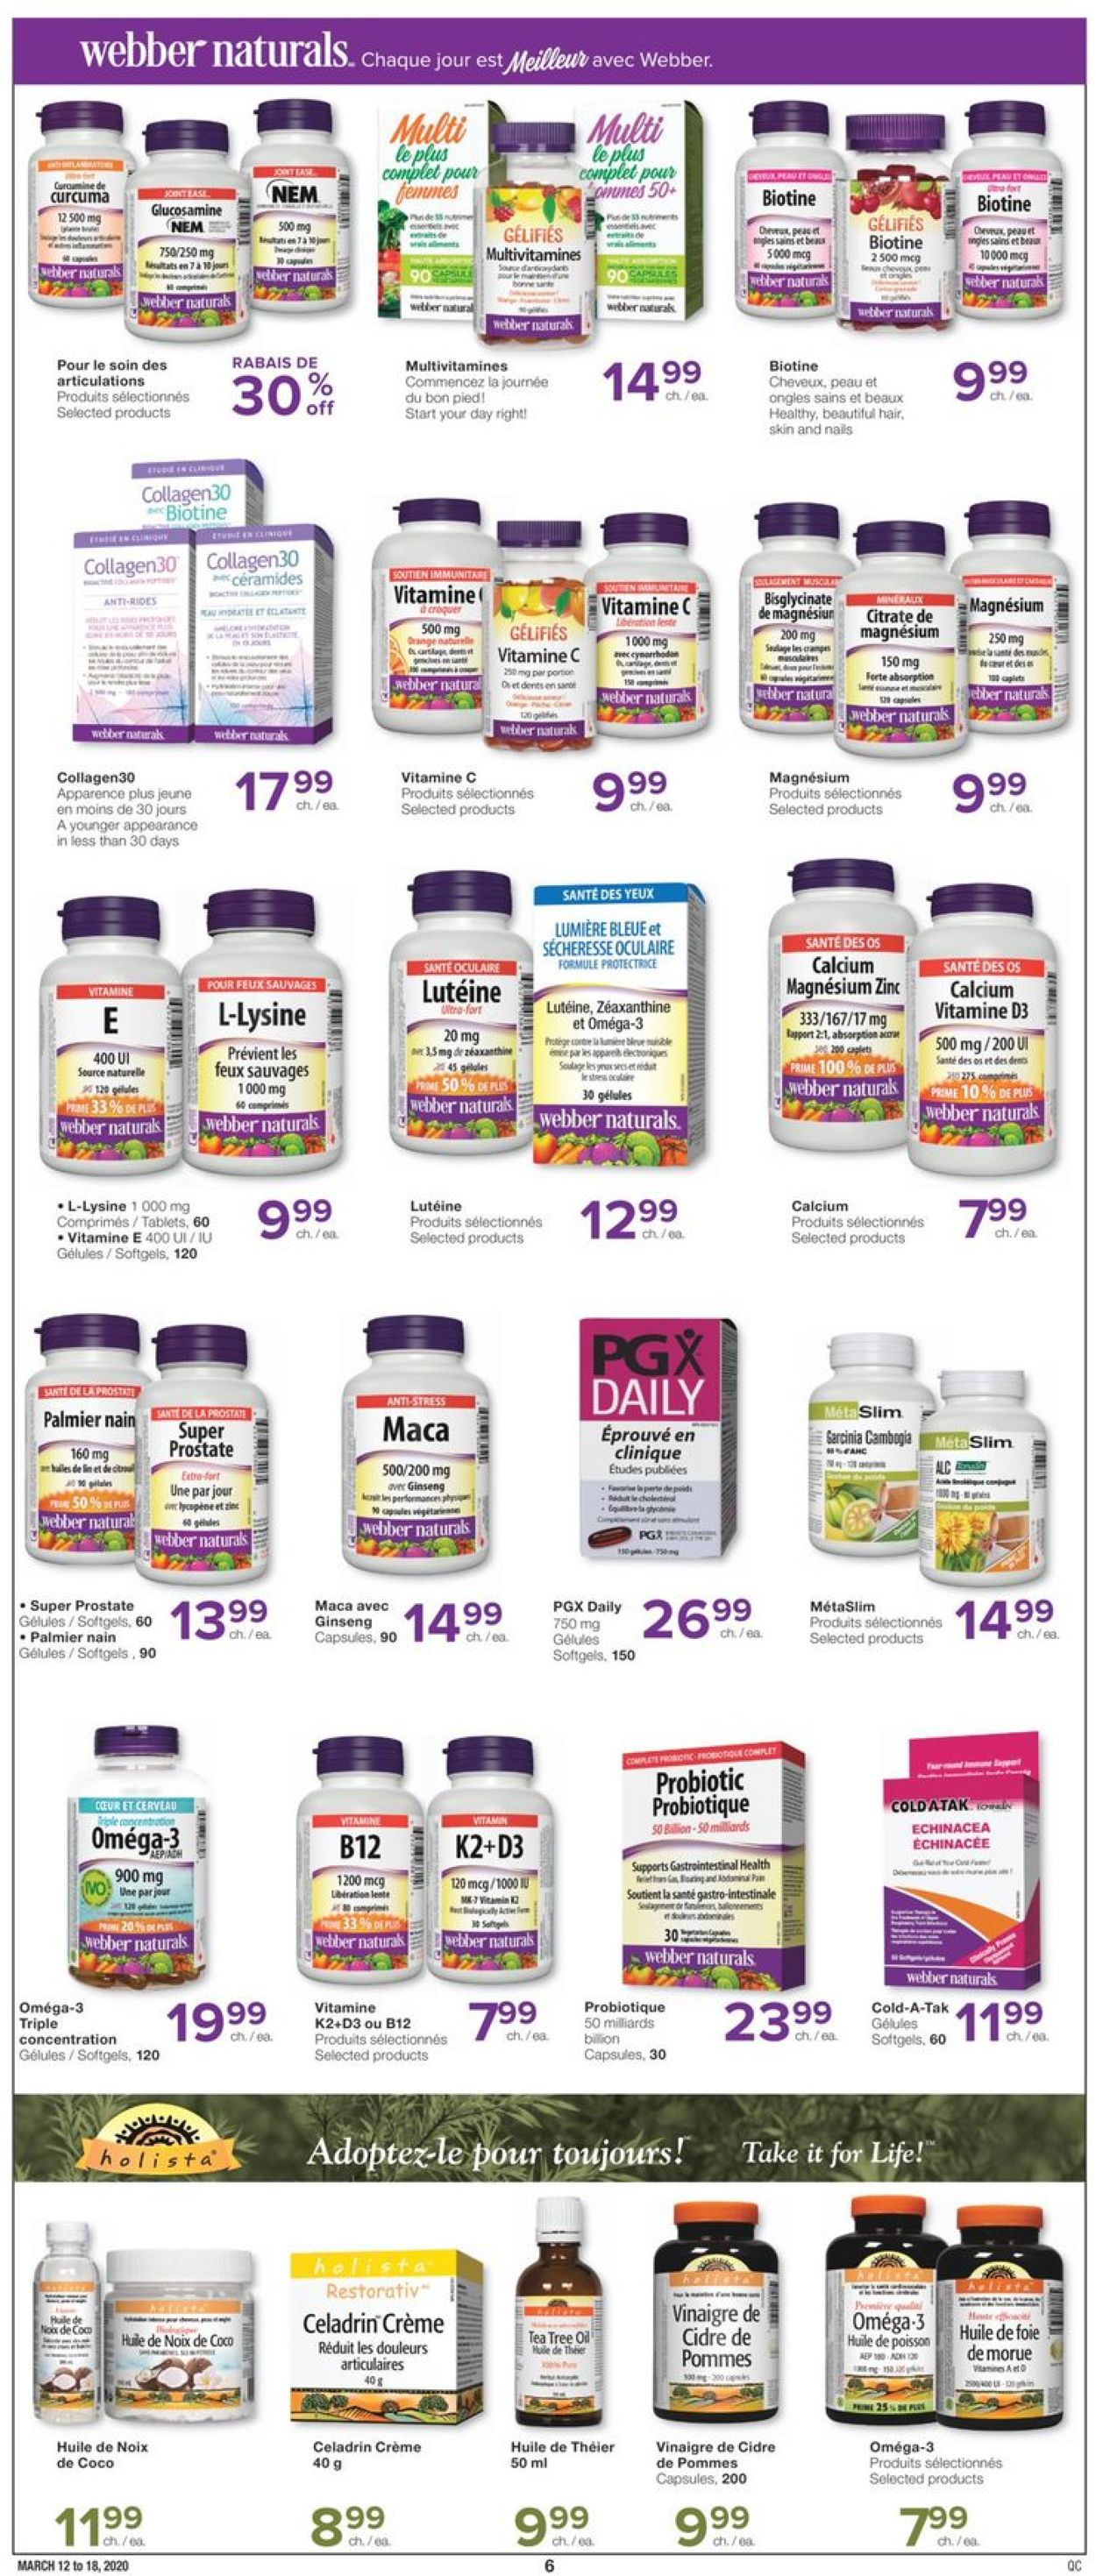 Jean Coutu Flyer from 03/12/2020